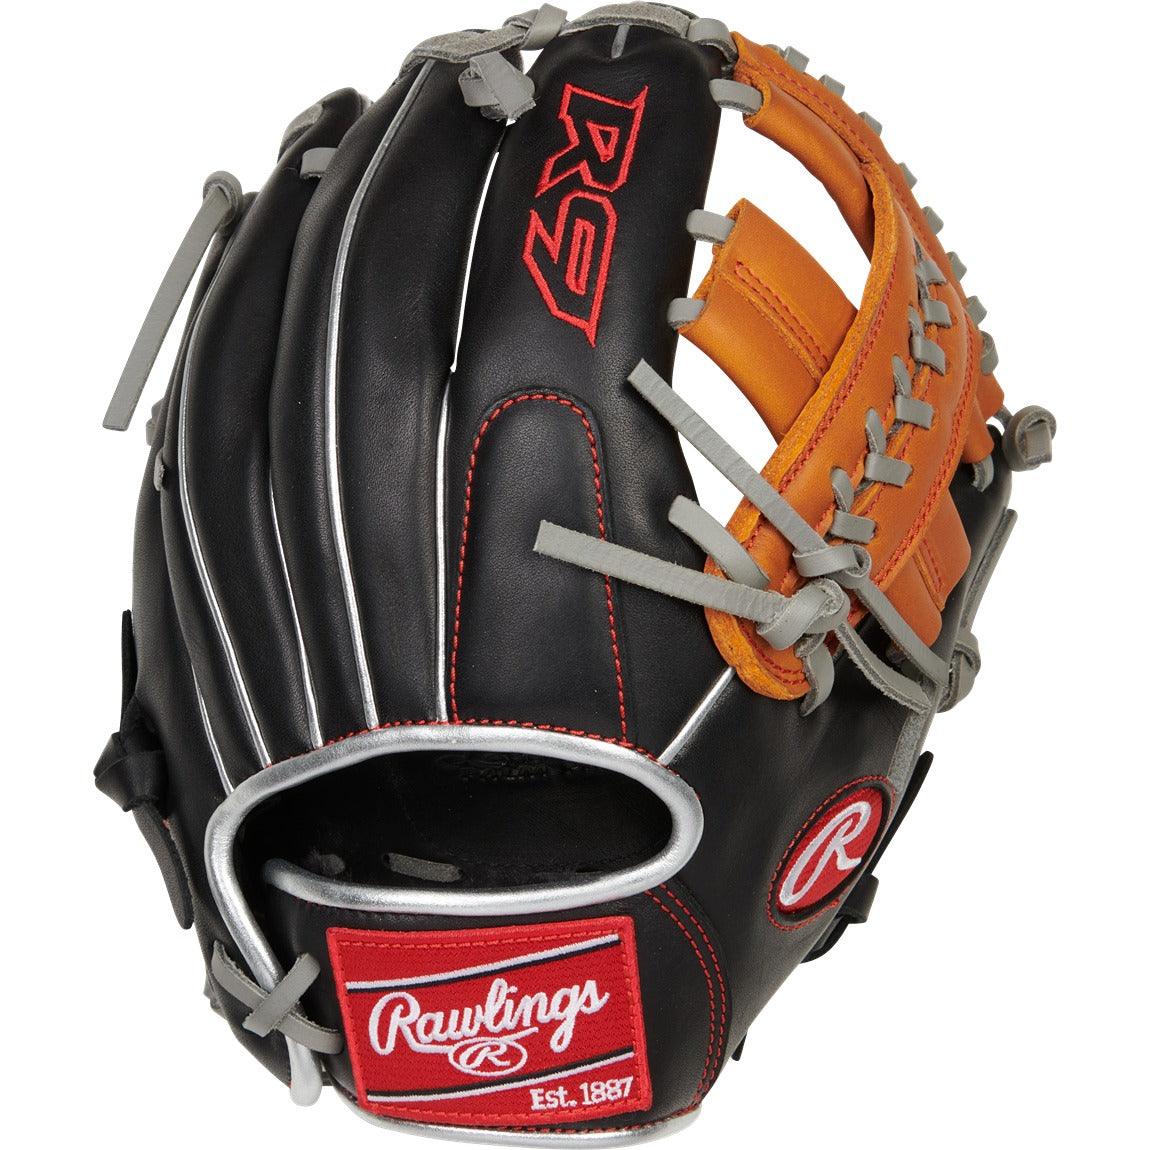 R9 ContoUR 11" Baseball Glove - Youth - Sports Excellence